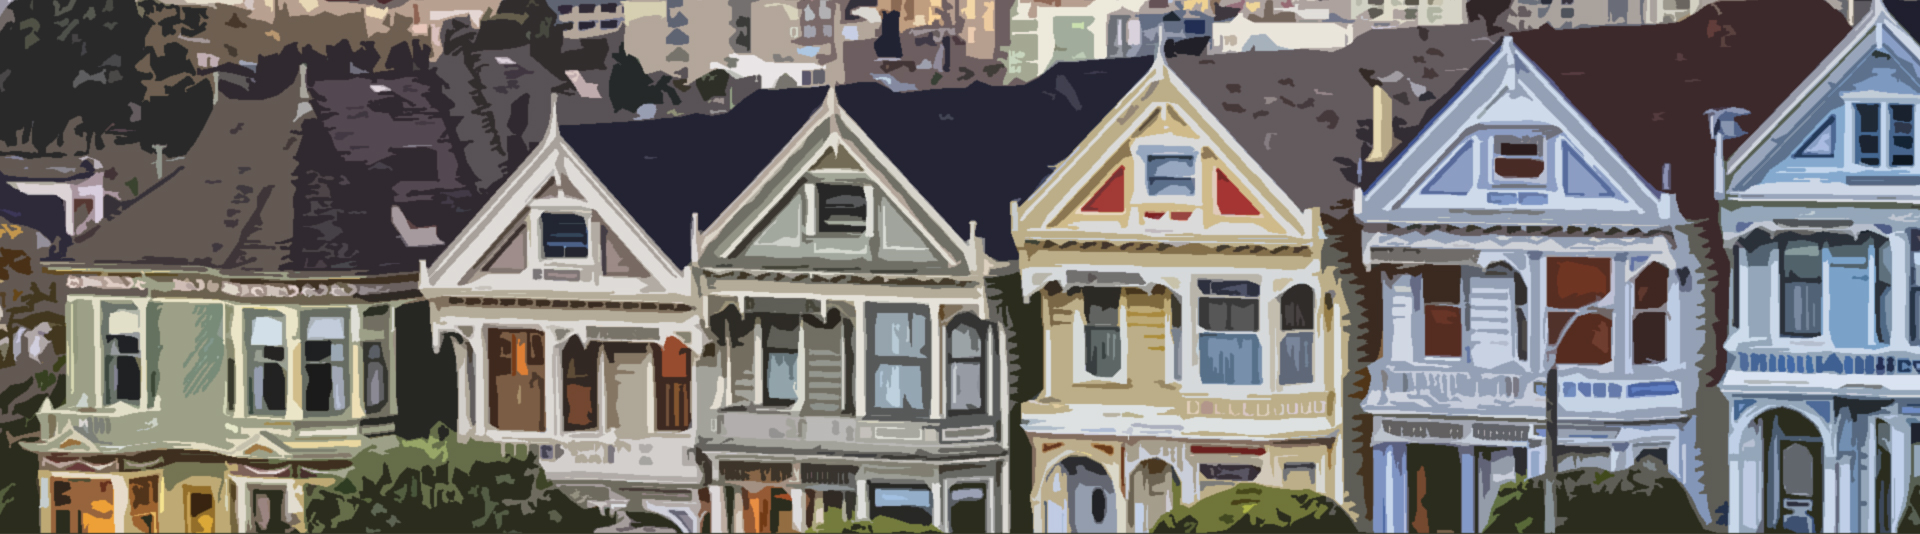 A row of Victorian homes on Alamo Square in San Francisco